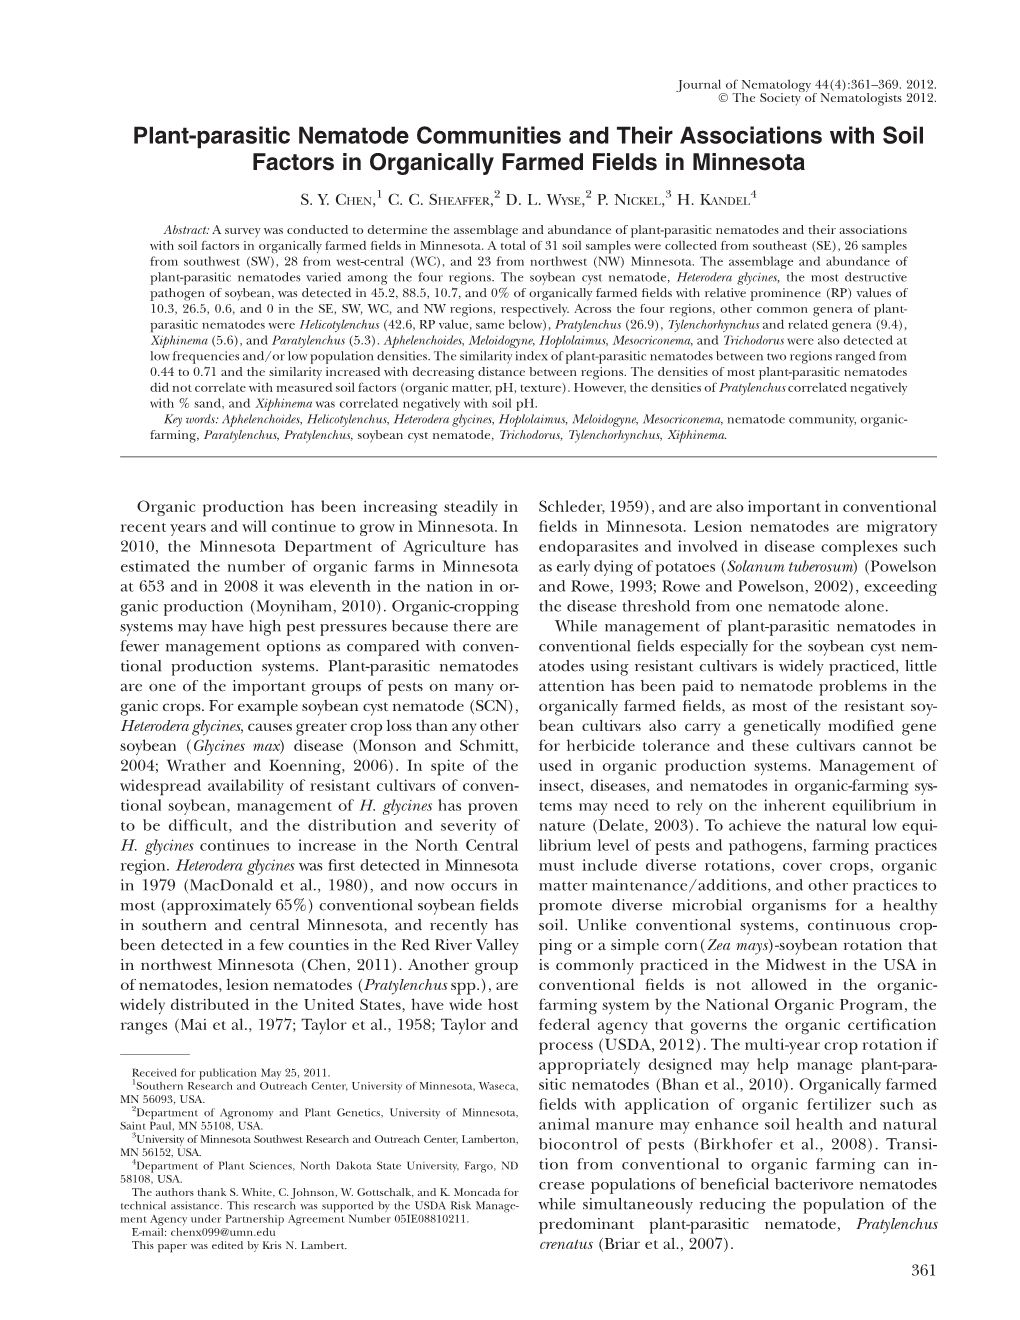 Plant-Parasitic Nematode Communities and Their Associations with Soil Factors in Organically Farmed Fields in Minnesota